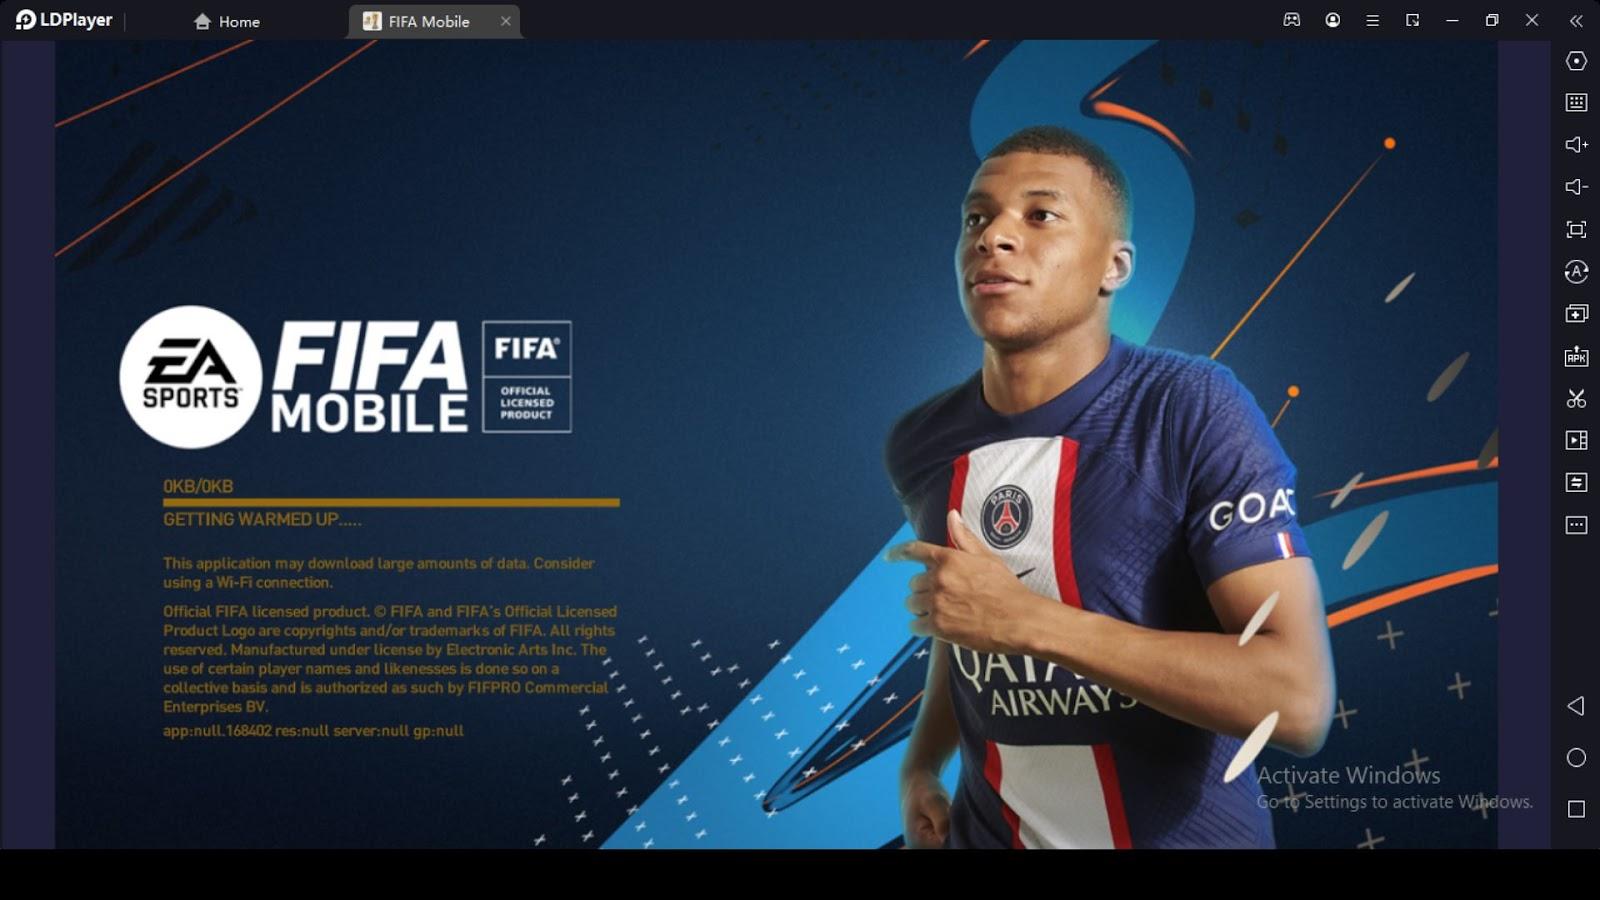 EA SPORTS FIFA World Cup 2022™ Beginner Guide